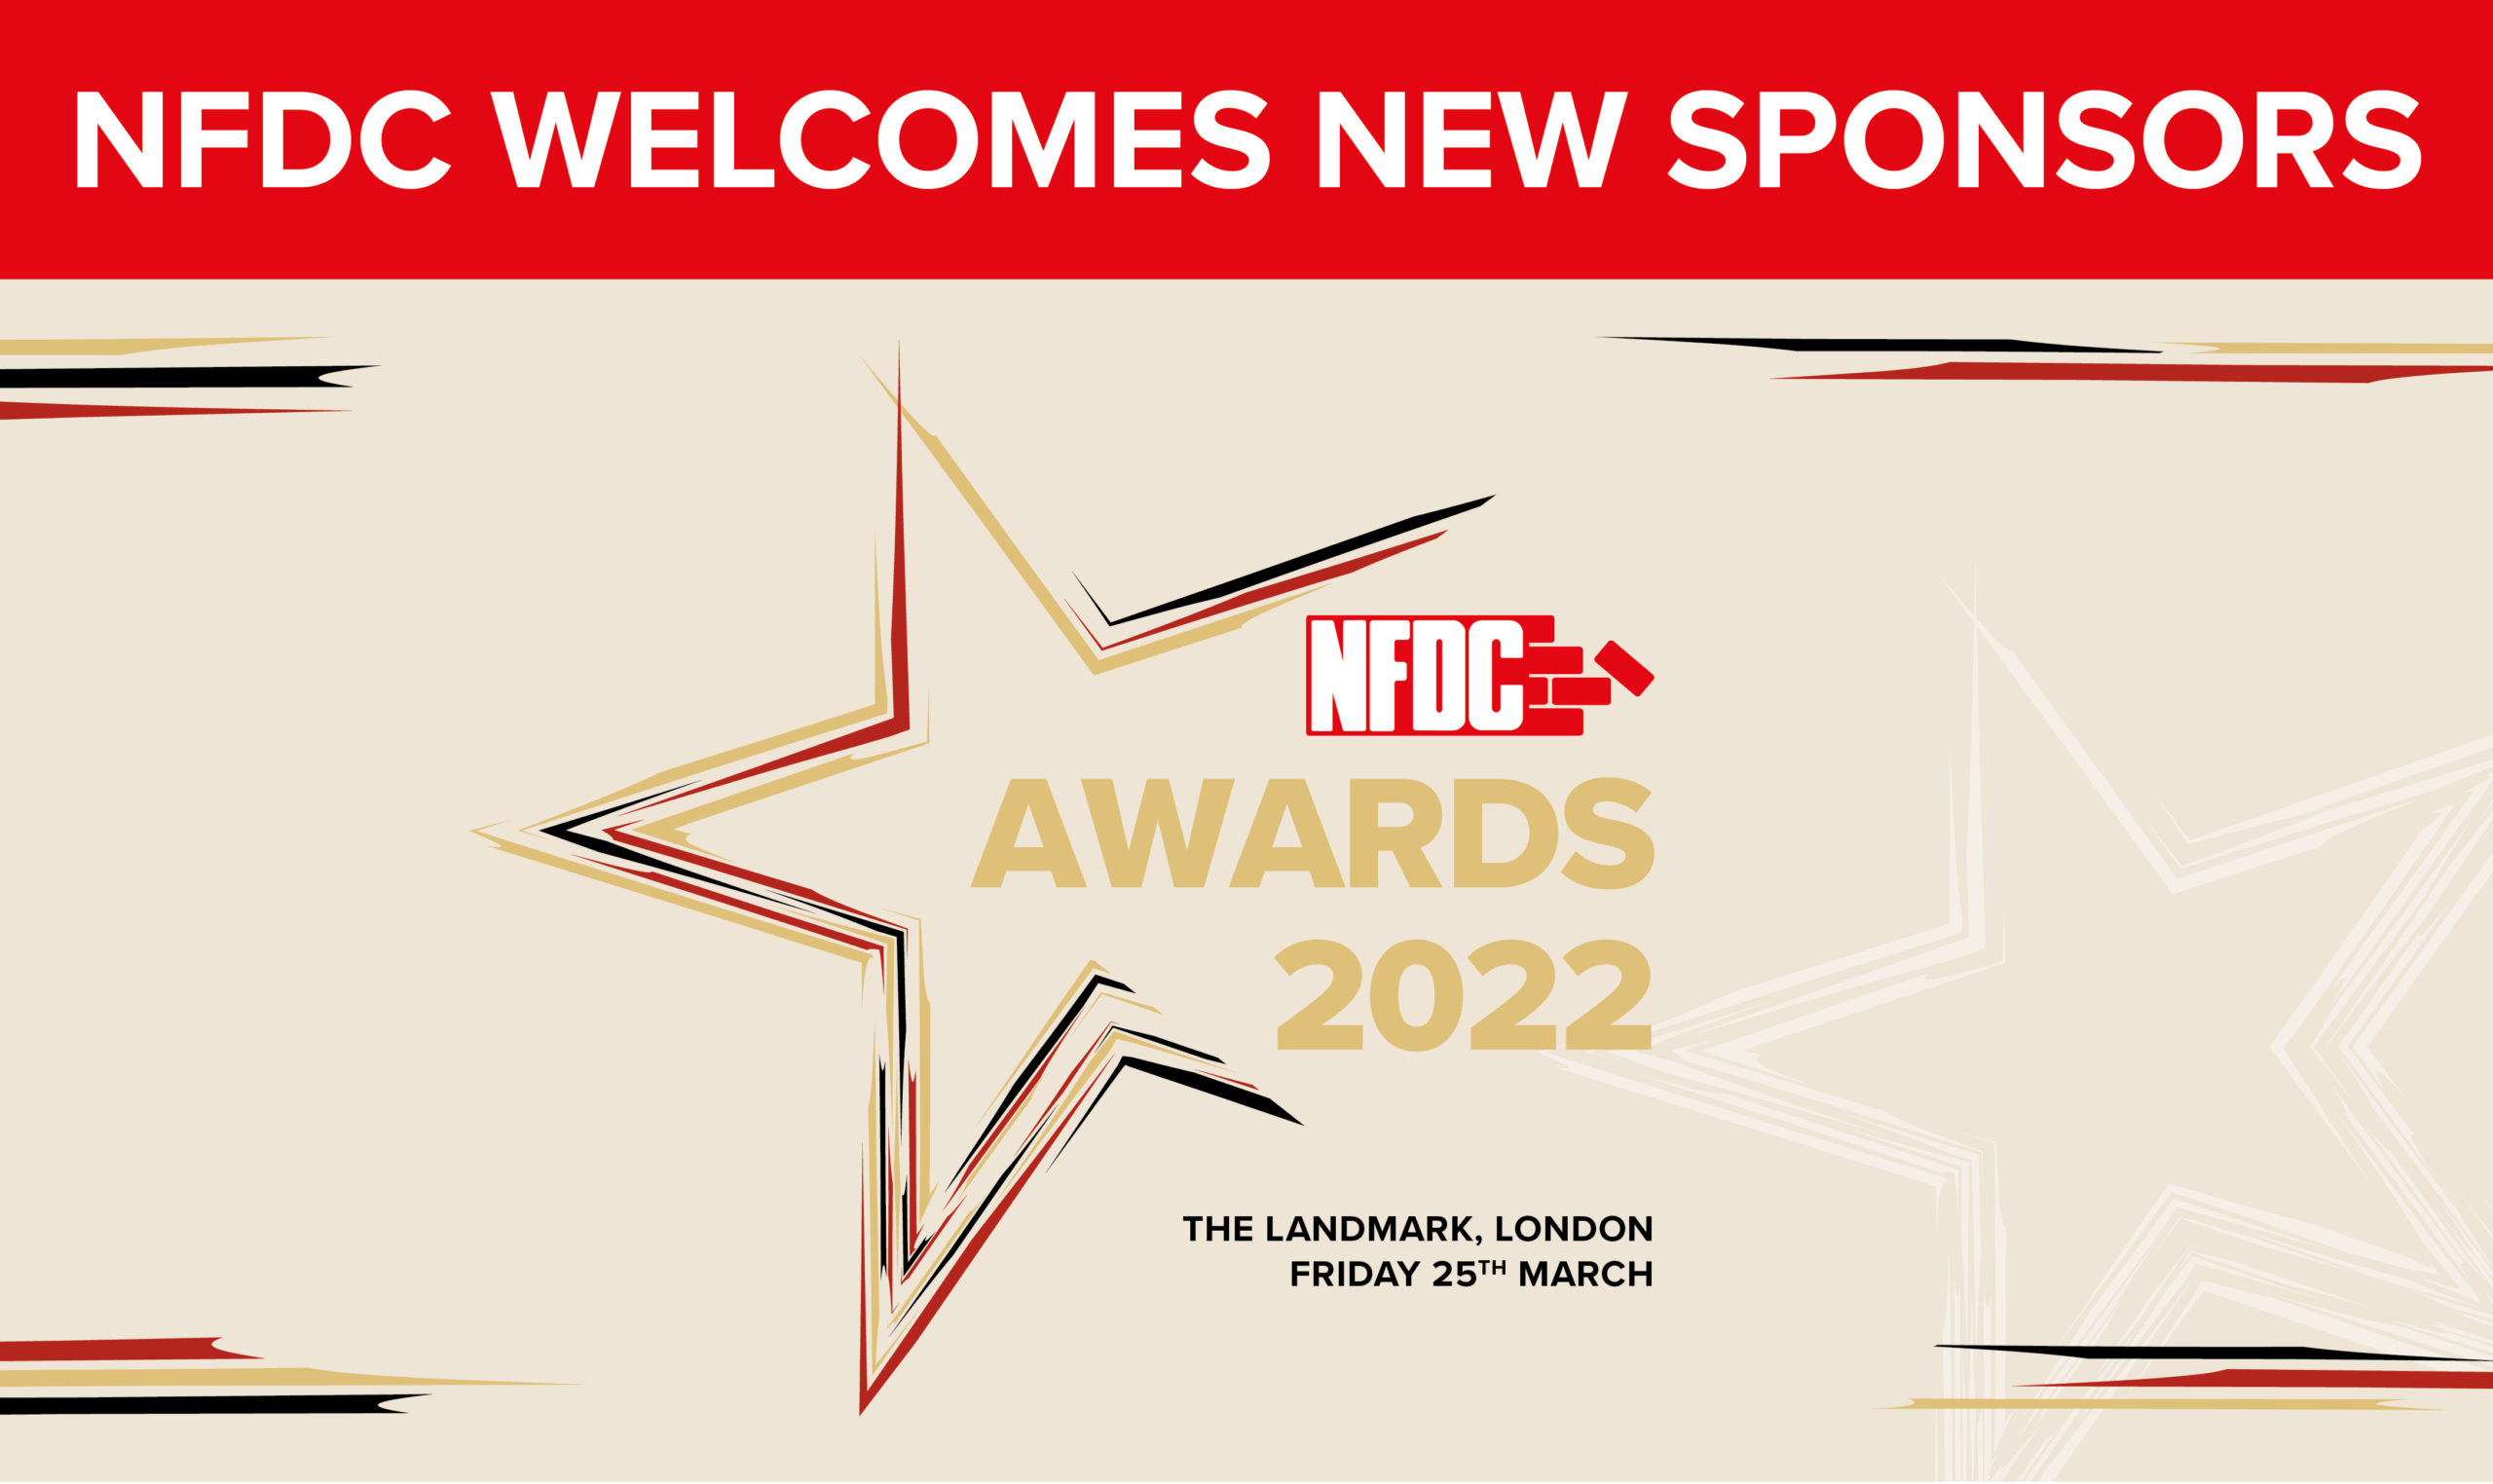 NFDC Awards: Introducing Our New Event Sponsors